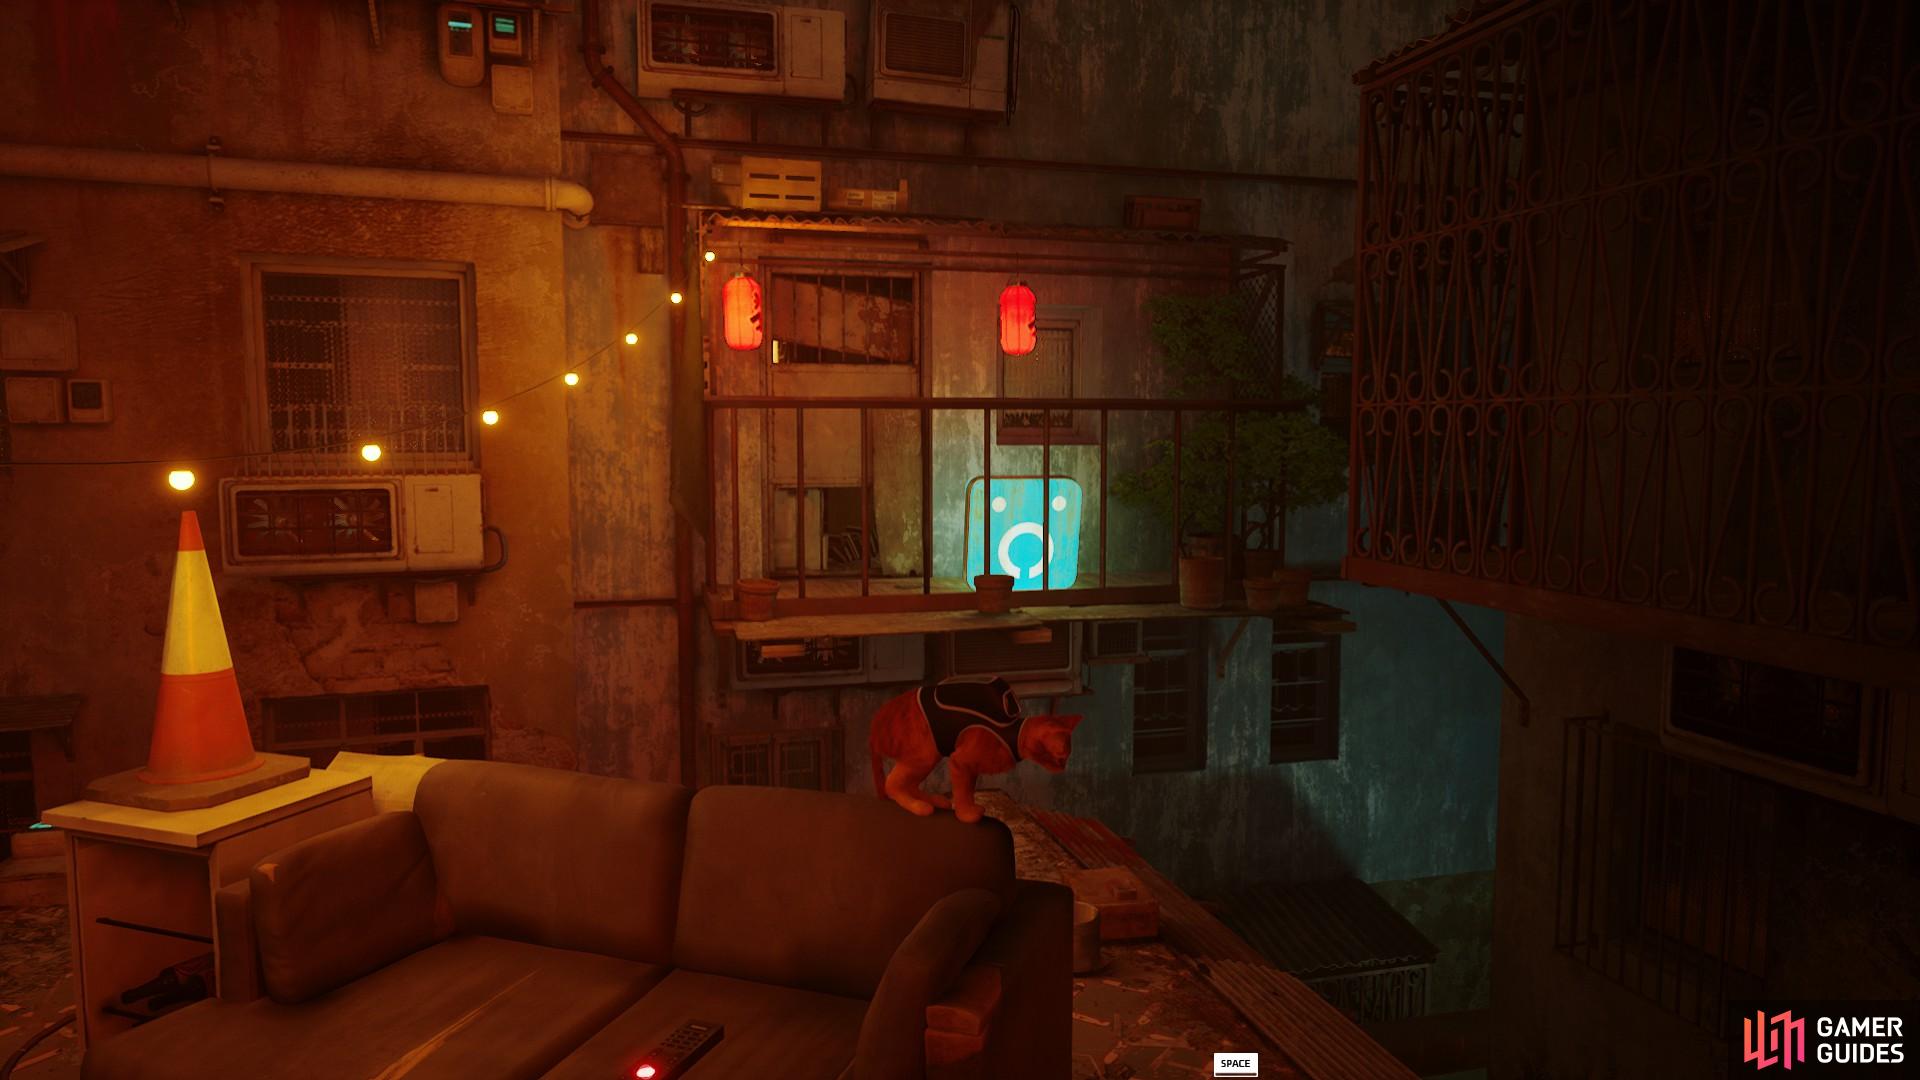 You can find the entrance to the Doc's library via the roof with the sofa.